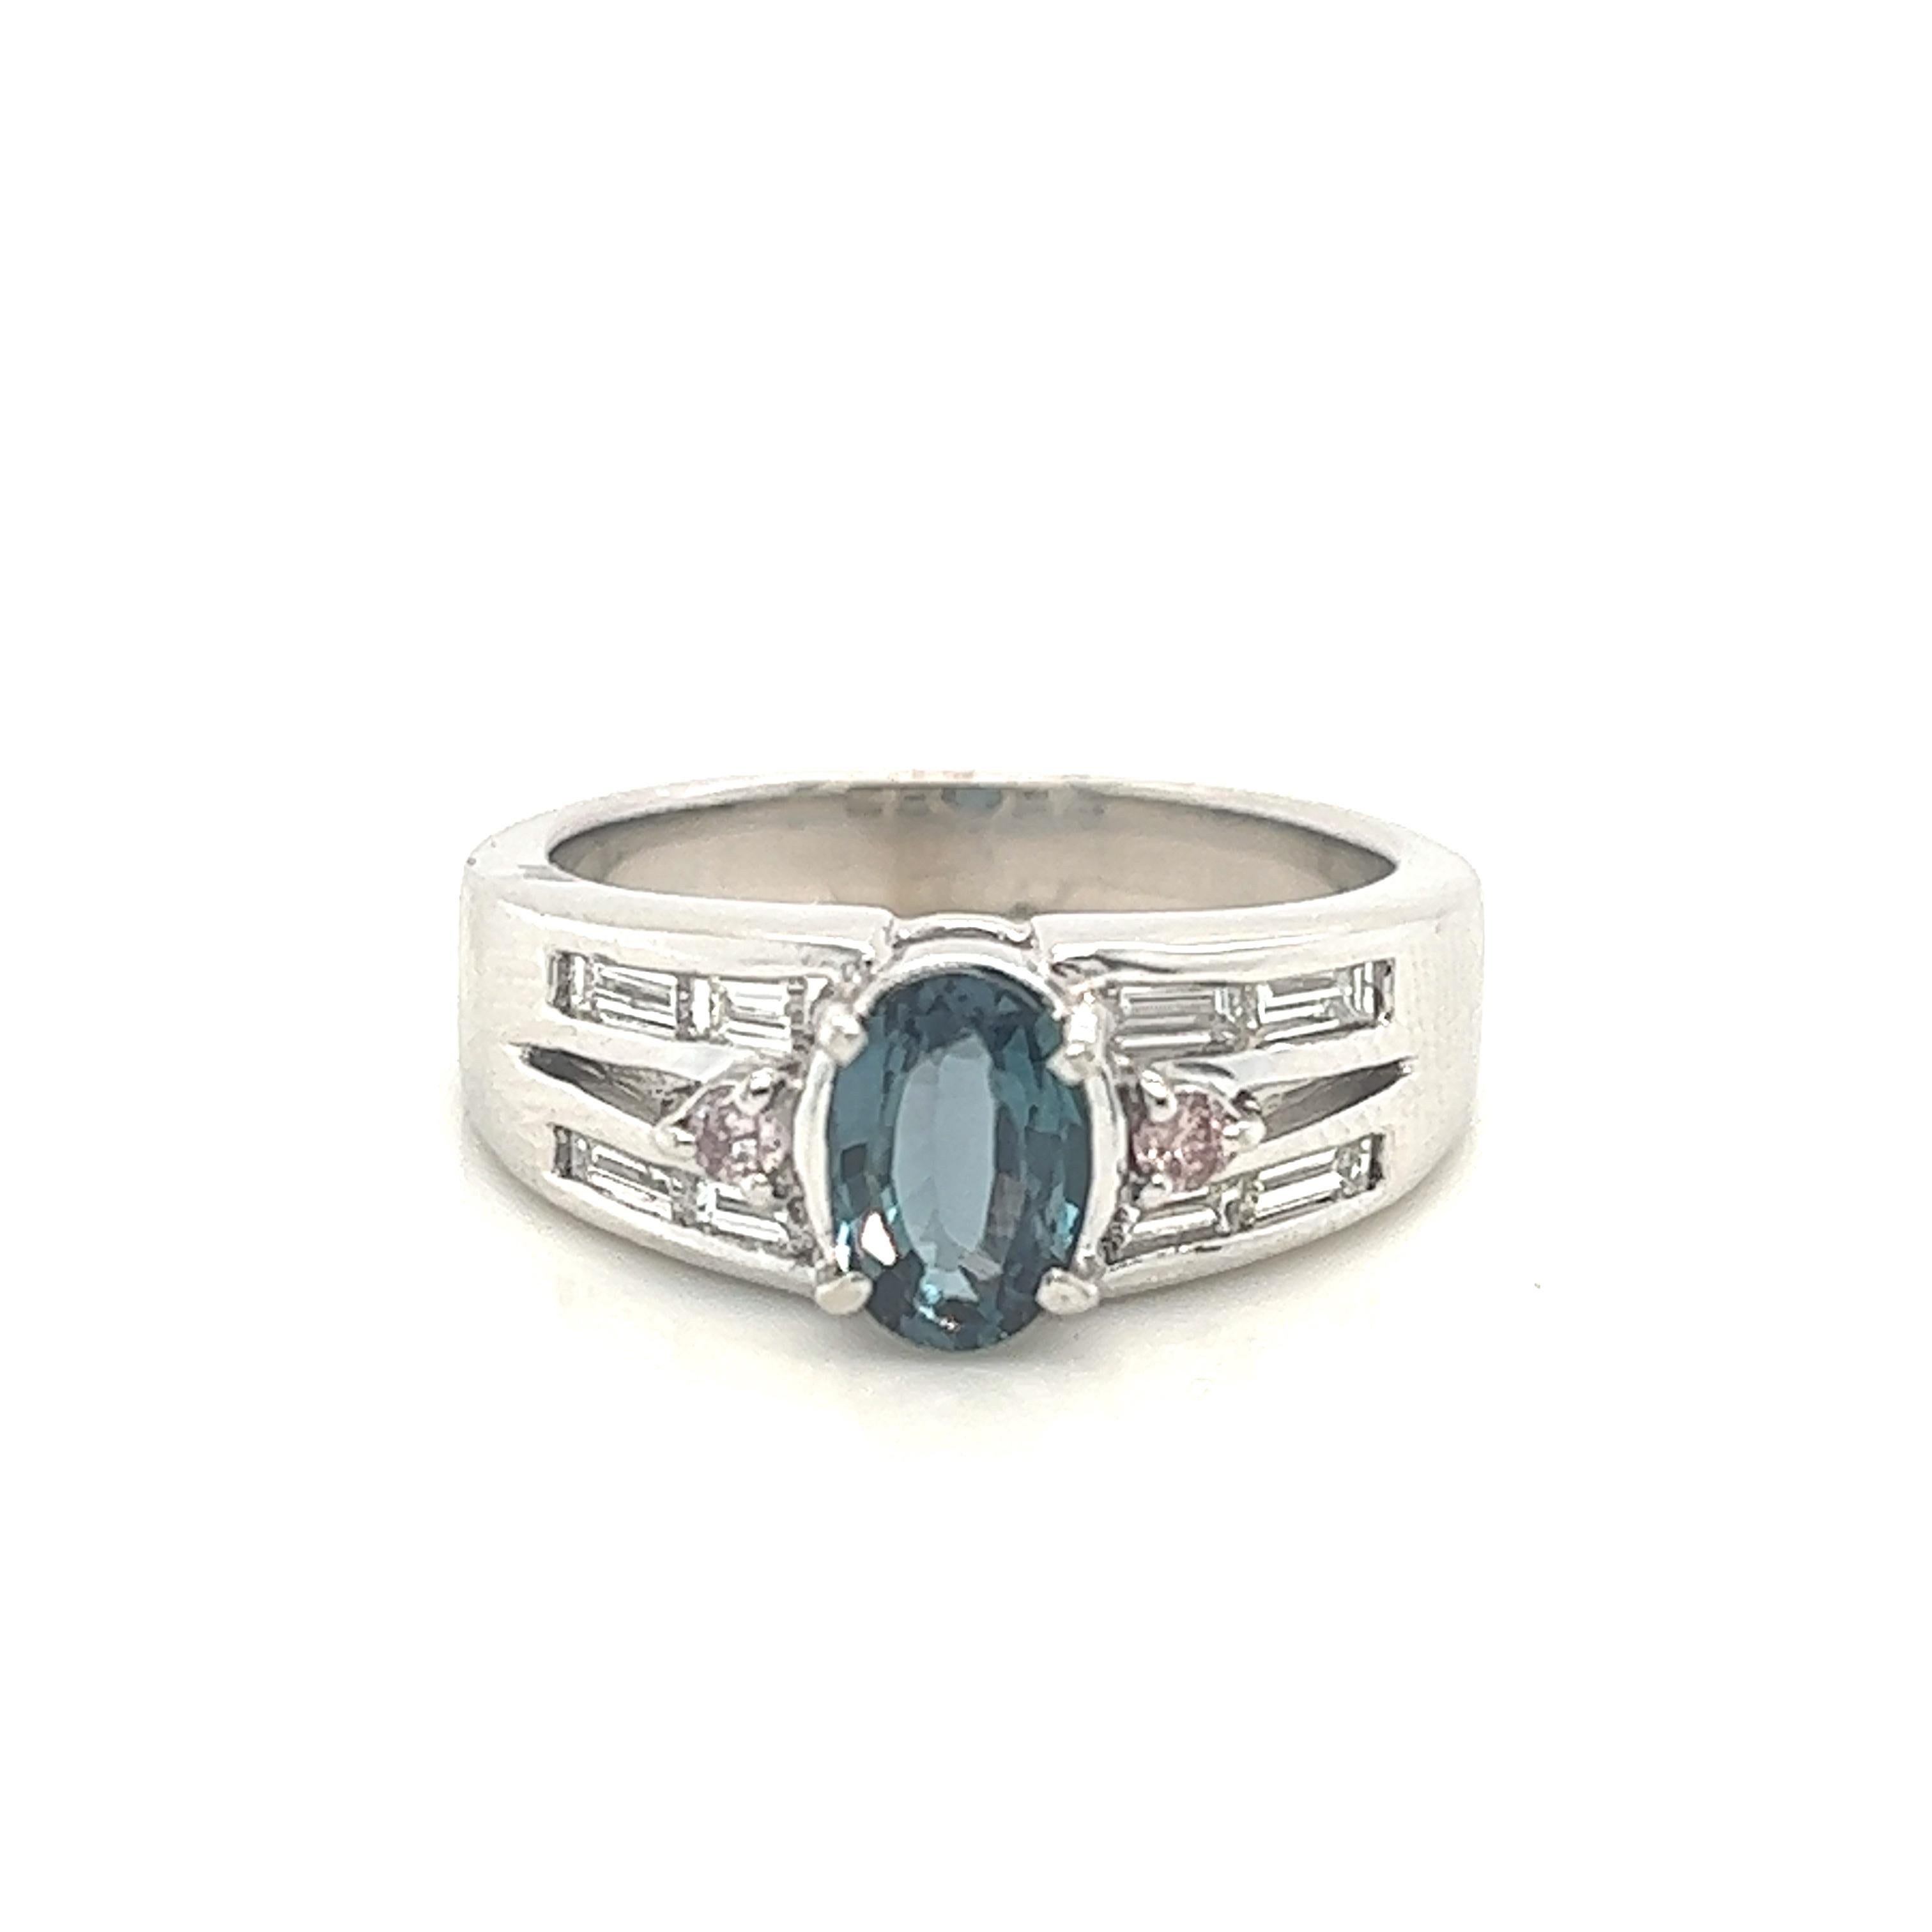 This is a gorgeous natural AAA quality Alexandrite surrounded by dainty diamonds that is set in a vintage platinum setting. This ring features a natural 0.97 carat oval alexandrite that is surrounded by brilliant white diamonds. The ring is a true